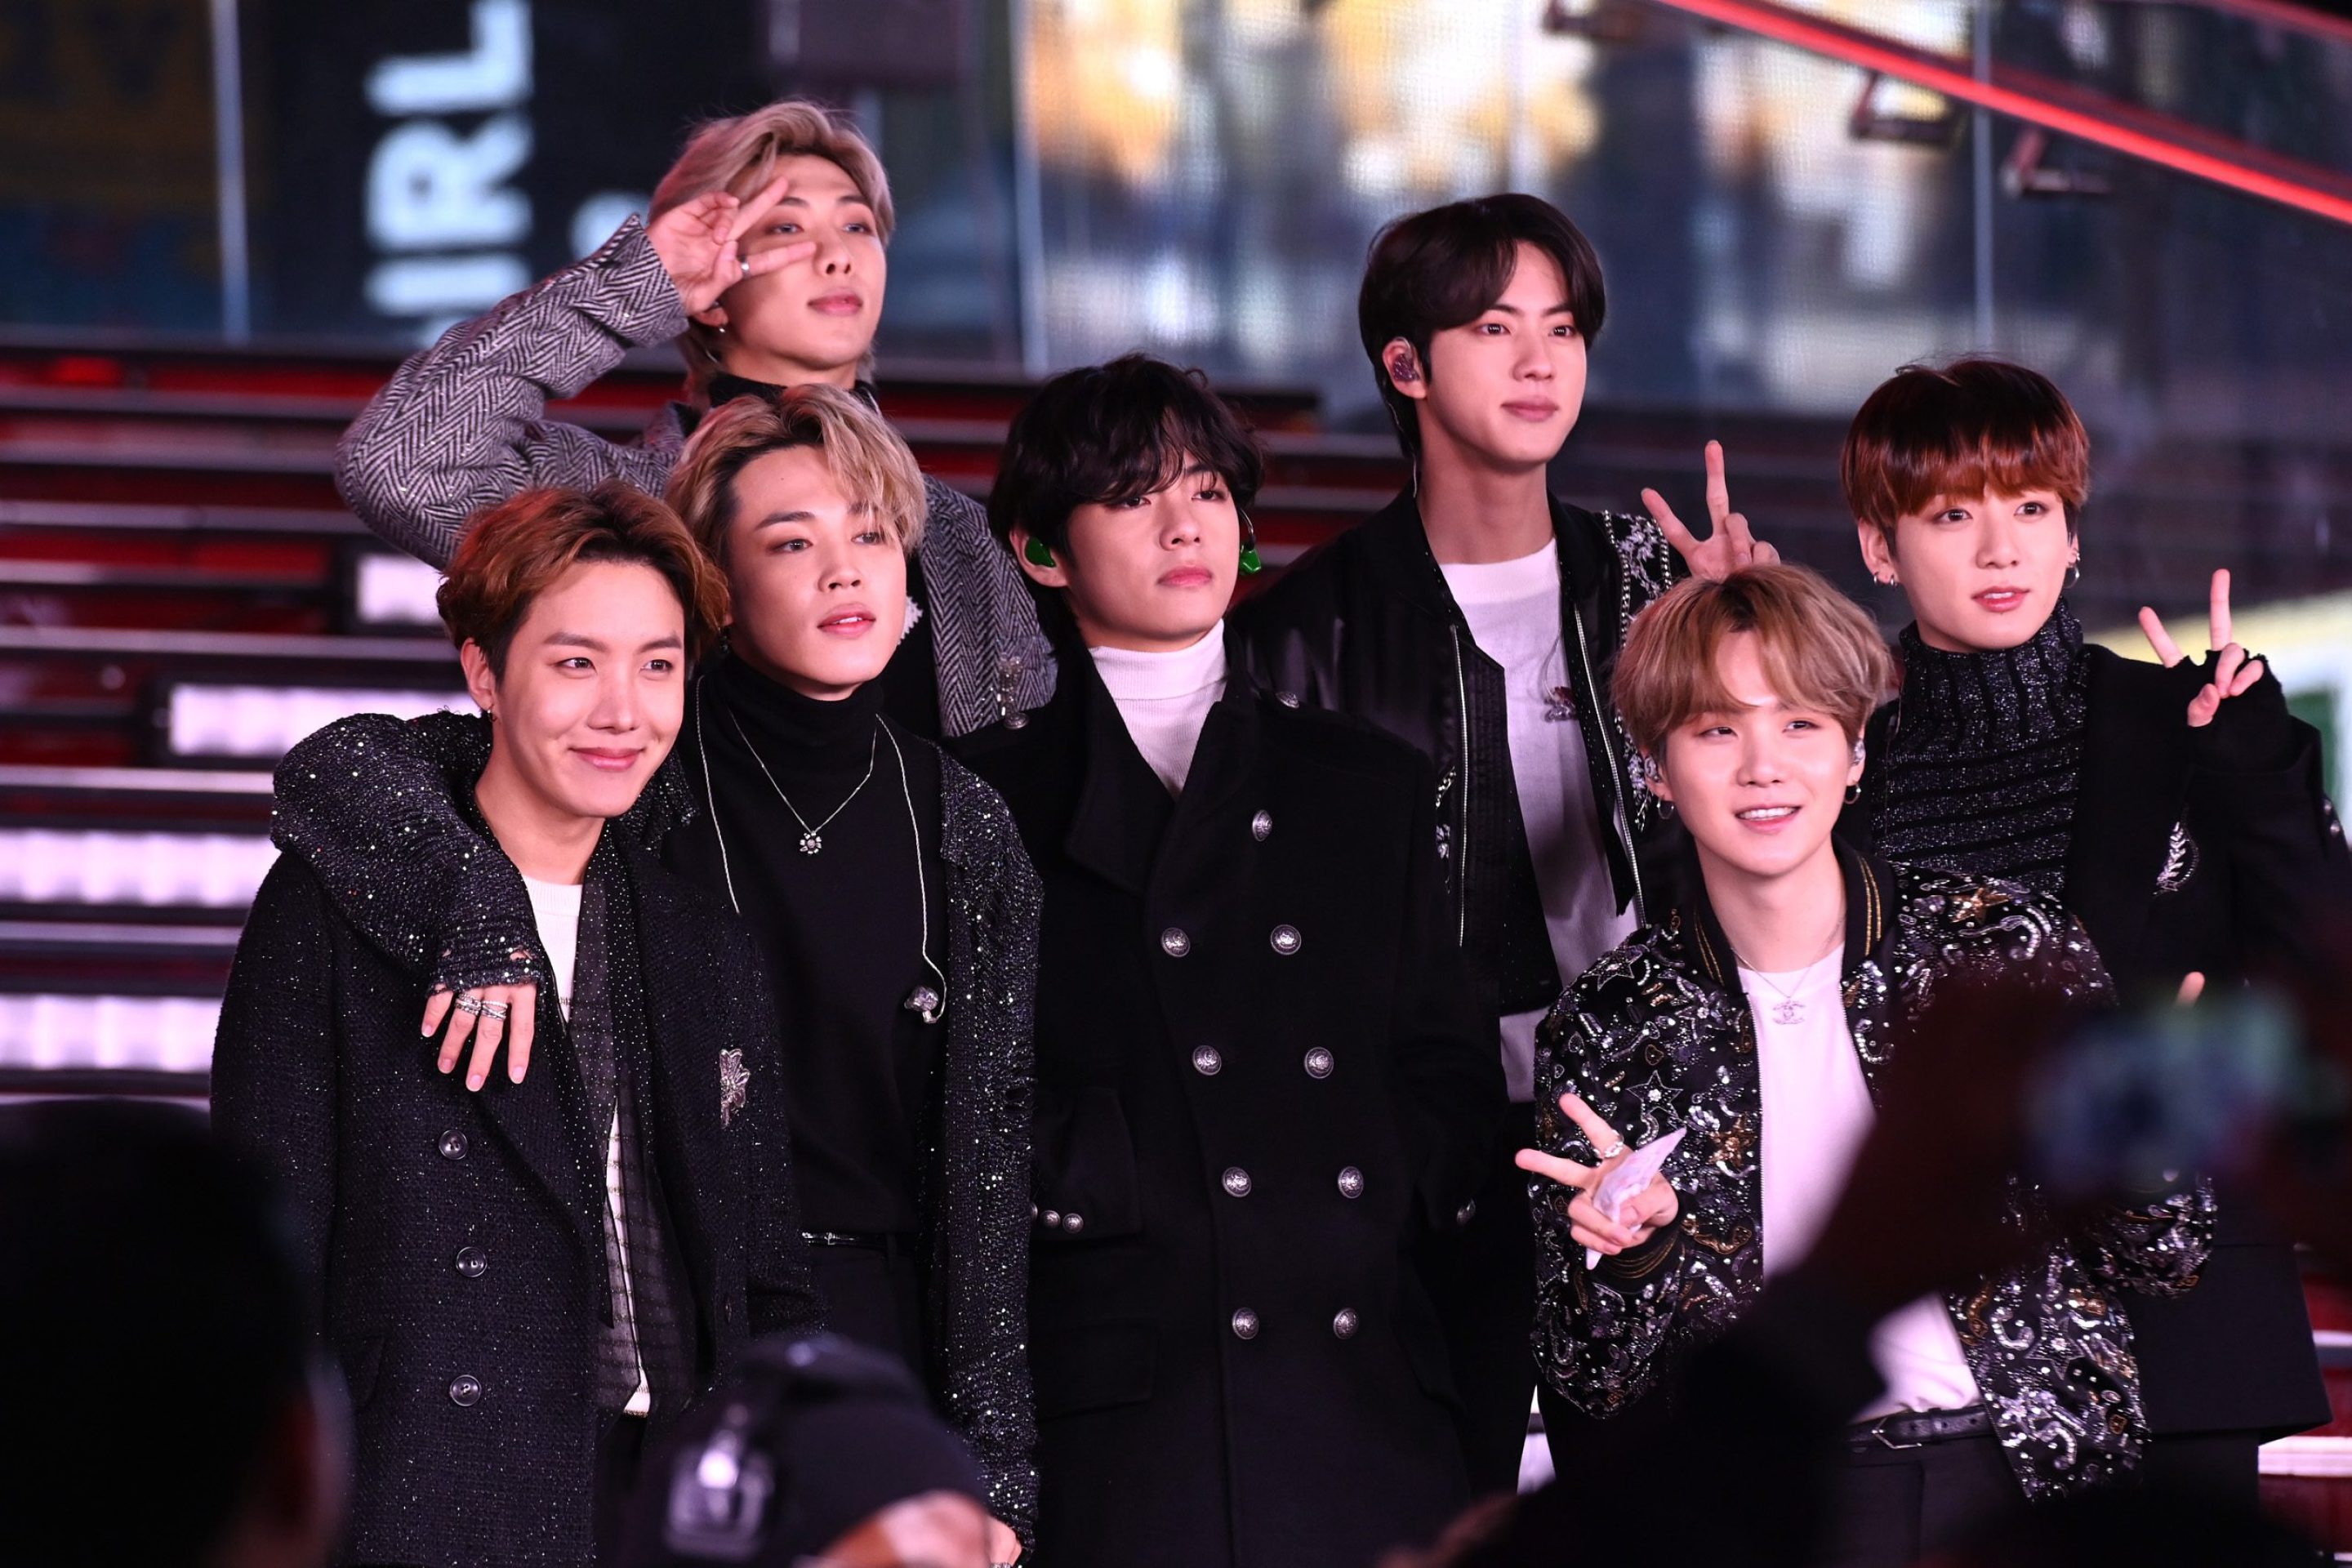 BTS performs during Dick Clark's New Year's Rockin' Eve With Ryan Seacrest 2020 on December 31, 2019 in New York City. All seven members are standing on a lighted staircase and smiling after their performance.